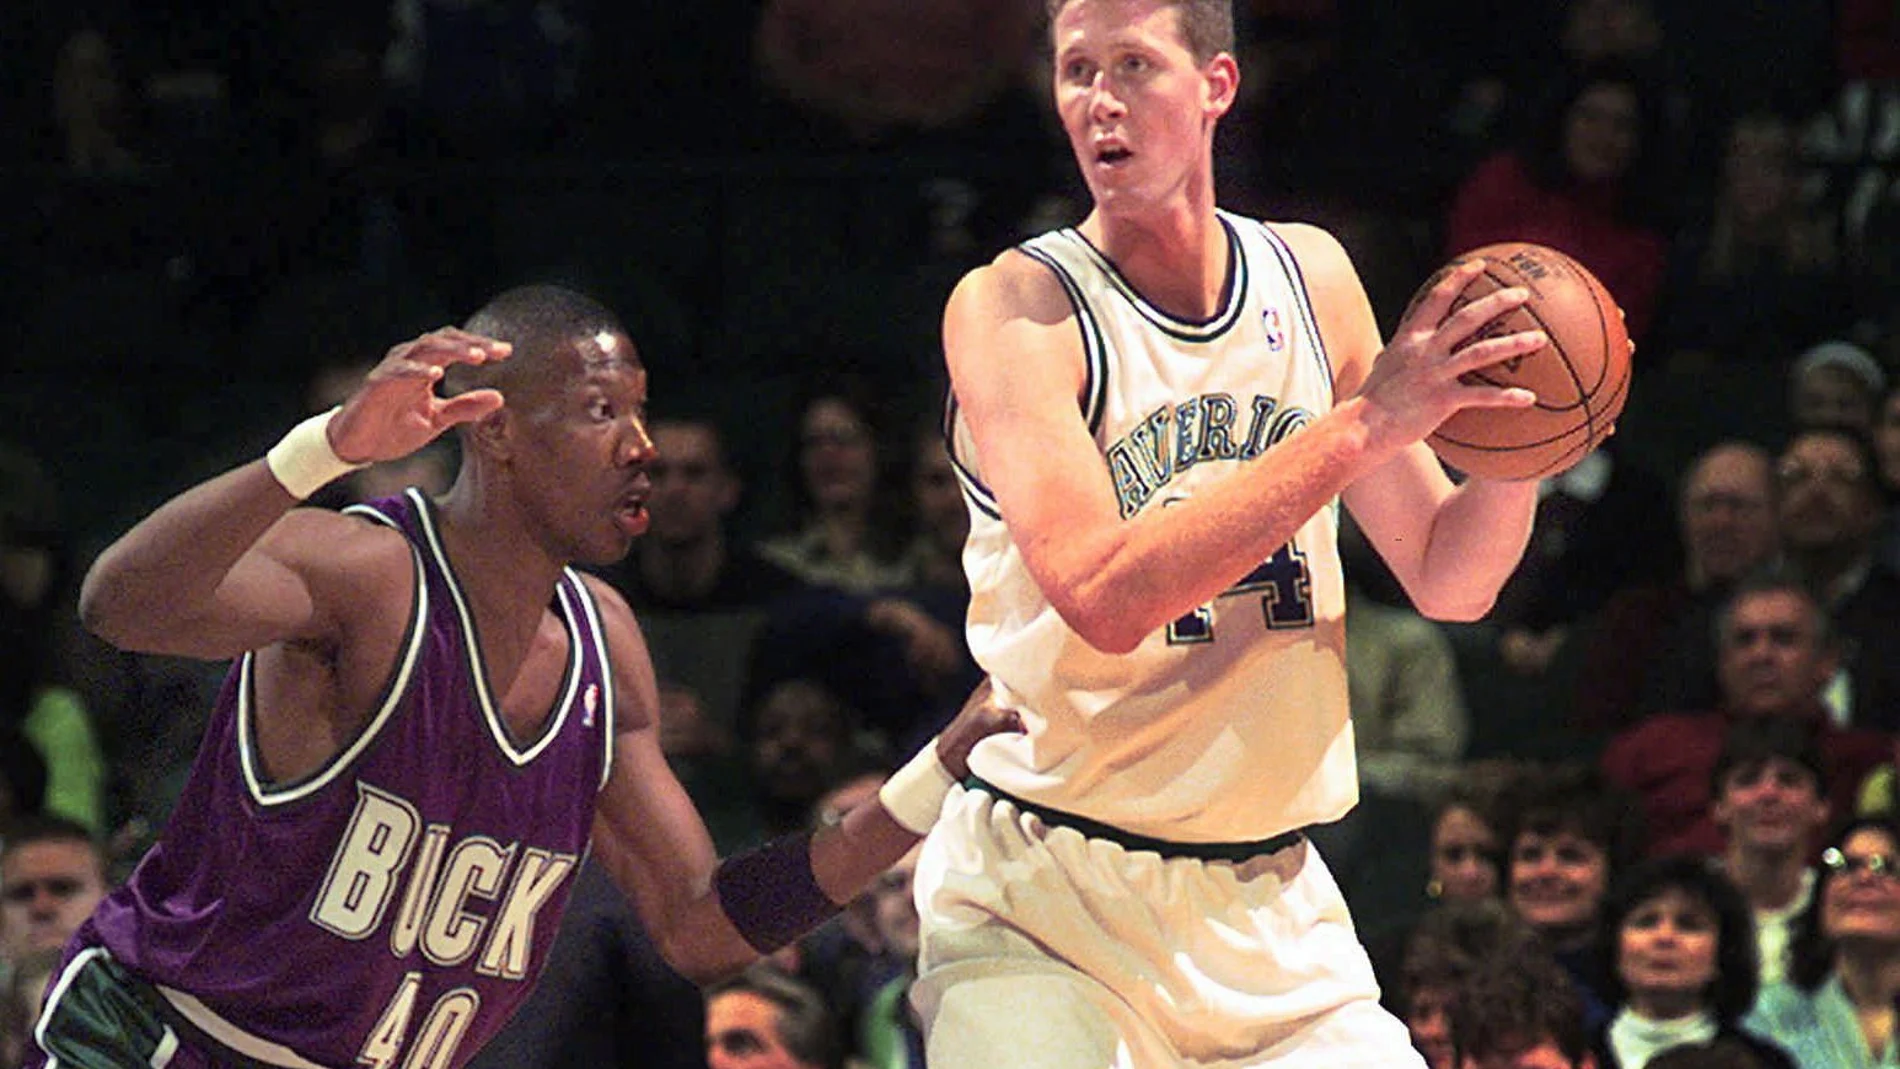 FILE- In this Nov. 22, 1997, file photo, Dallas Mavericks' Shawn Bradley (44) looks to pass as Milwaukee Bucks' Ervin Johnson (40) defends during the first quarter of an NBA basketball game at the Reunion Arena in Dallas. Former NBA player Shawn Bradley was paralyzed when he was struck from behind by a vehicle while riding a bike near his Utah home, saying in a statement nearly two months after the accident he intended to bring awareness to bicycle safety. (AP Photo/LM Otero, File)